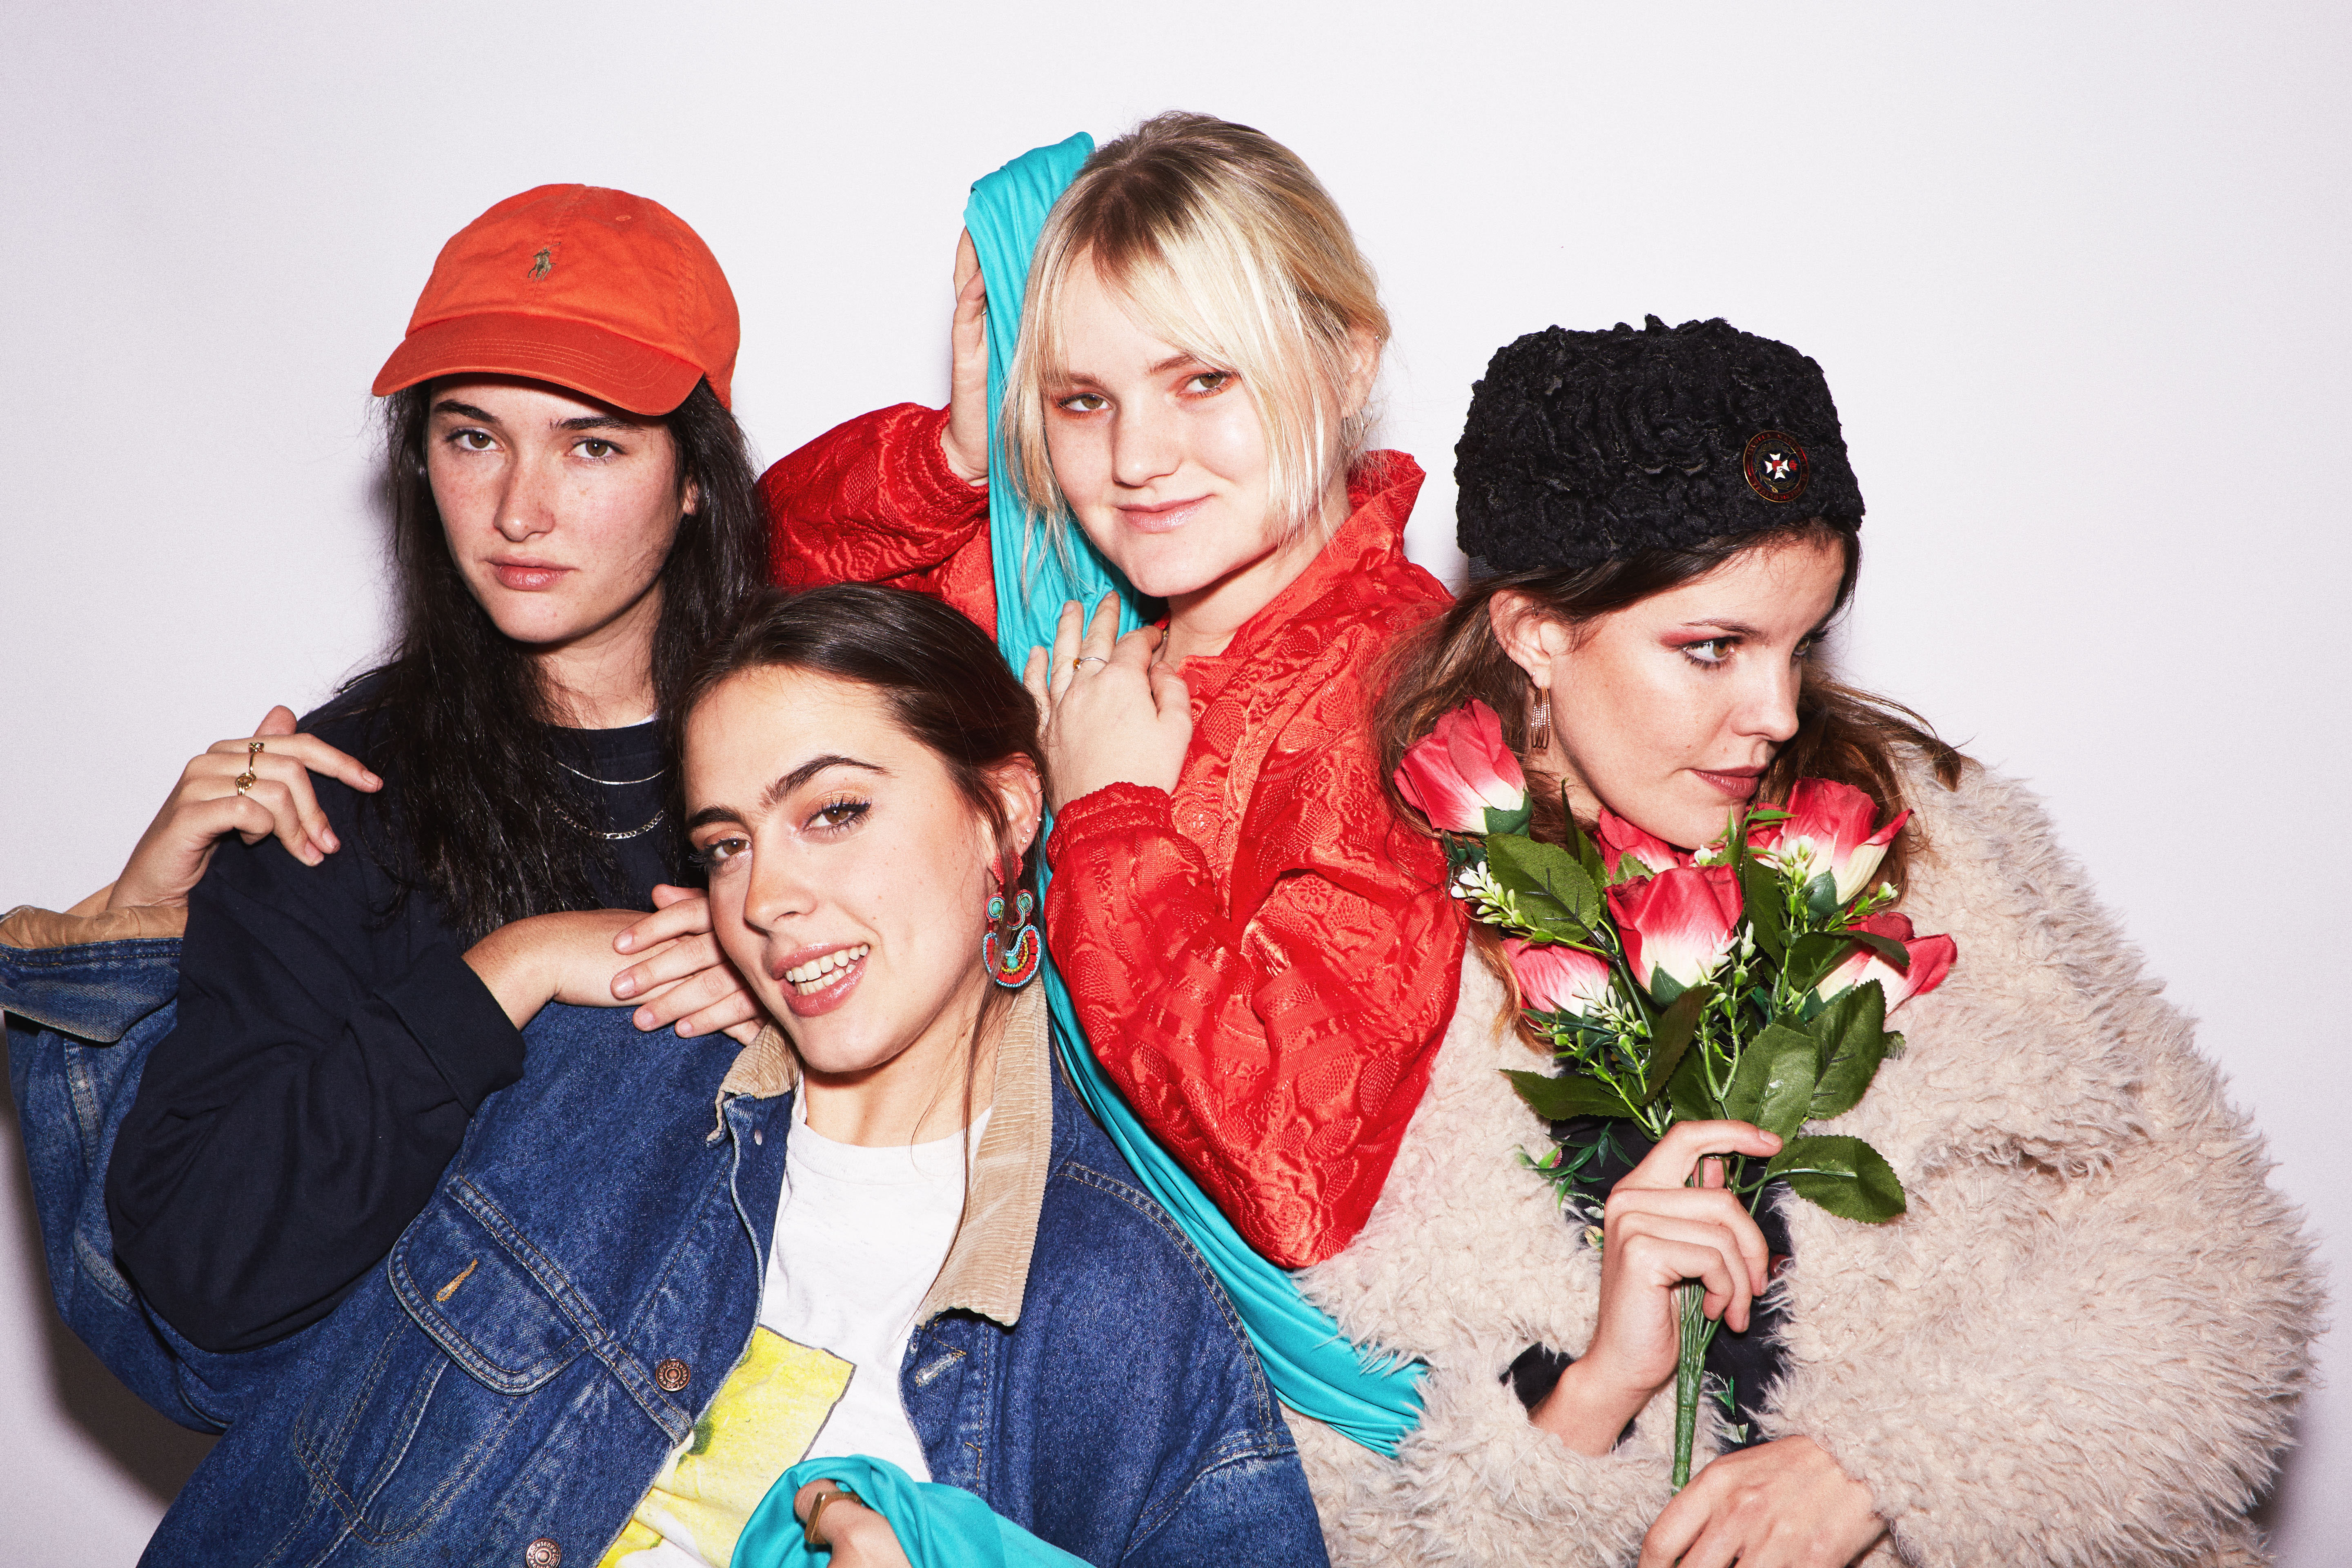 Promo image of Hinds for New For You single